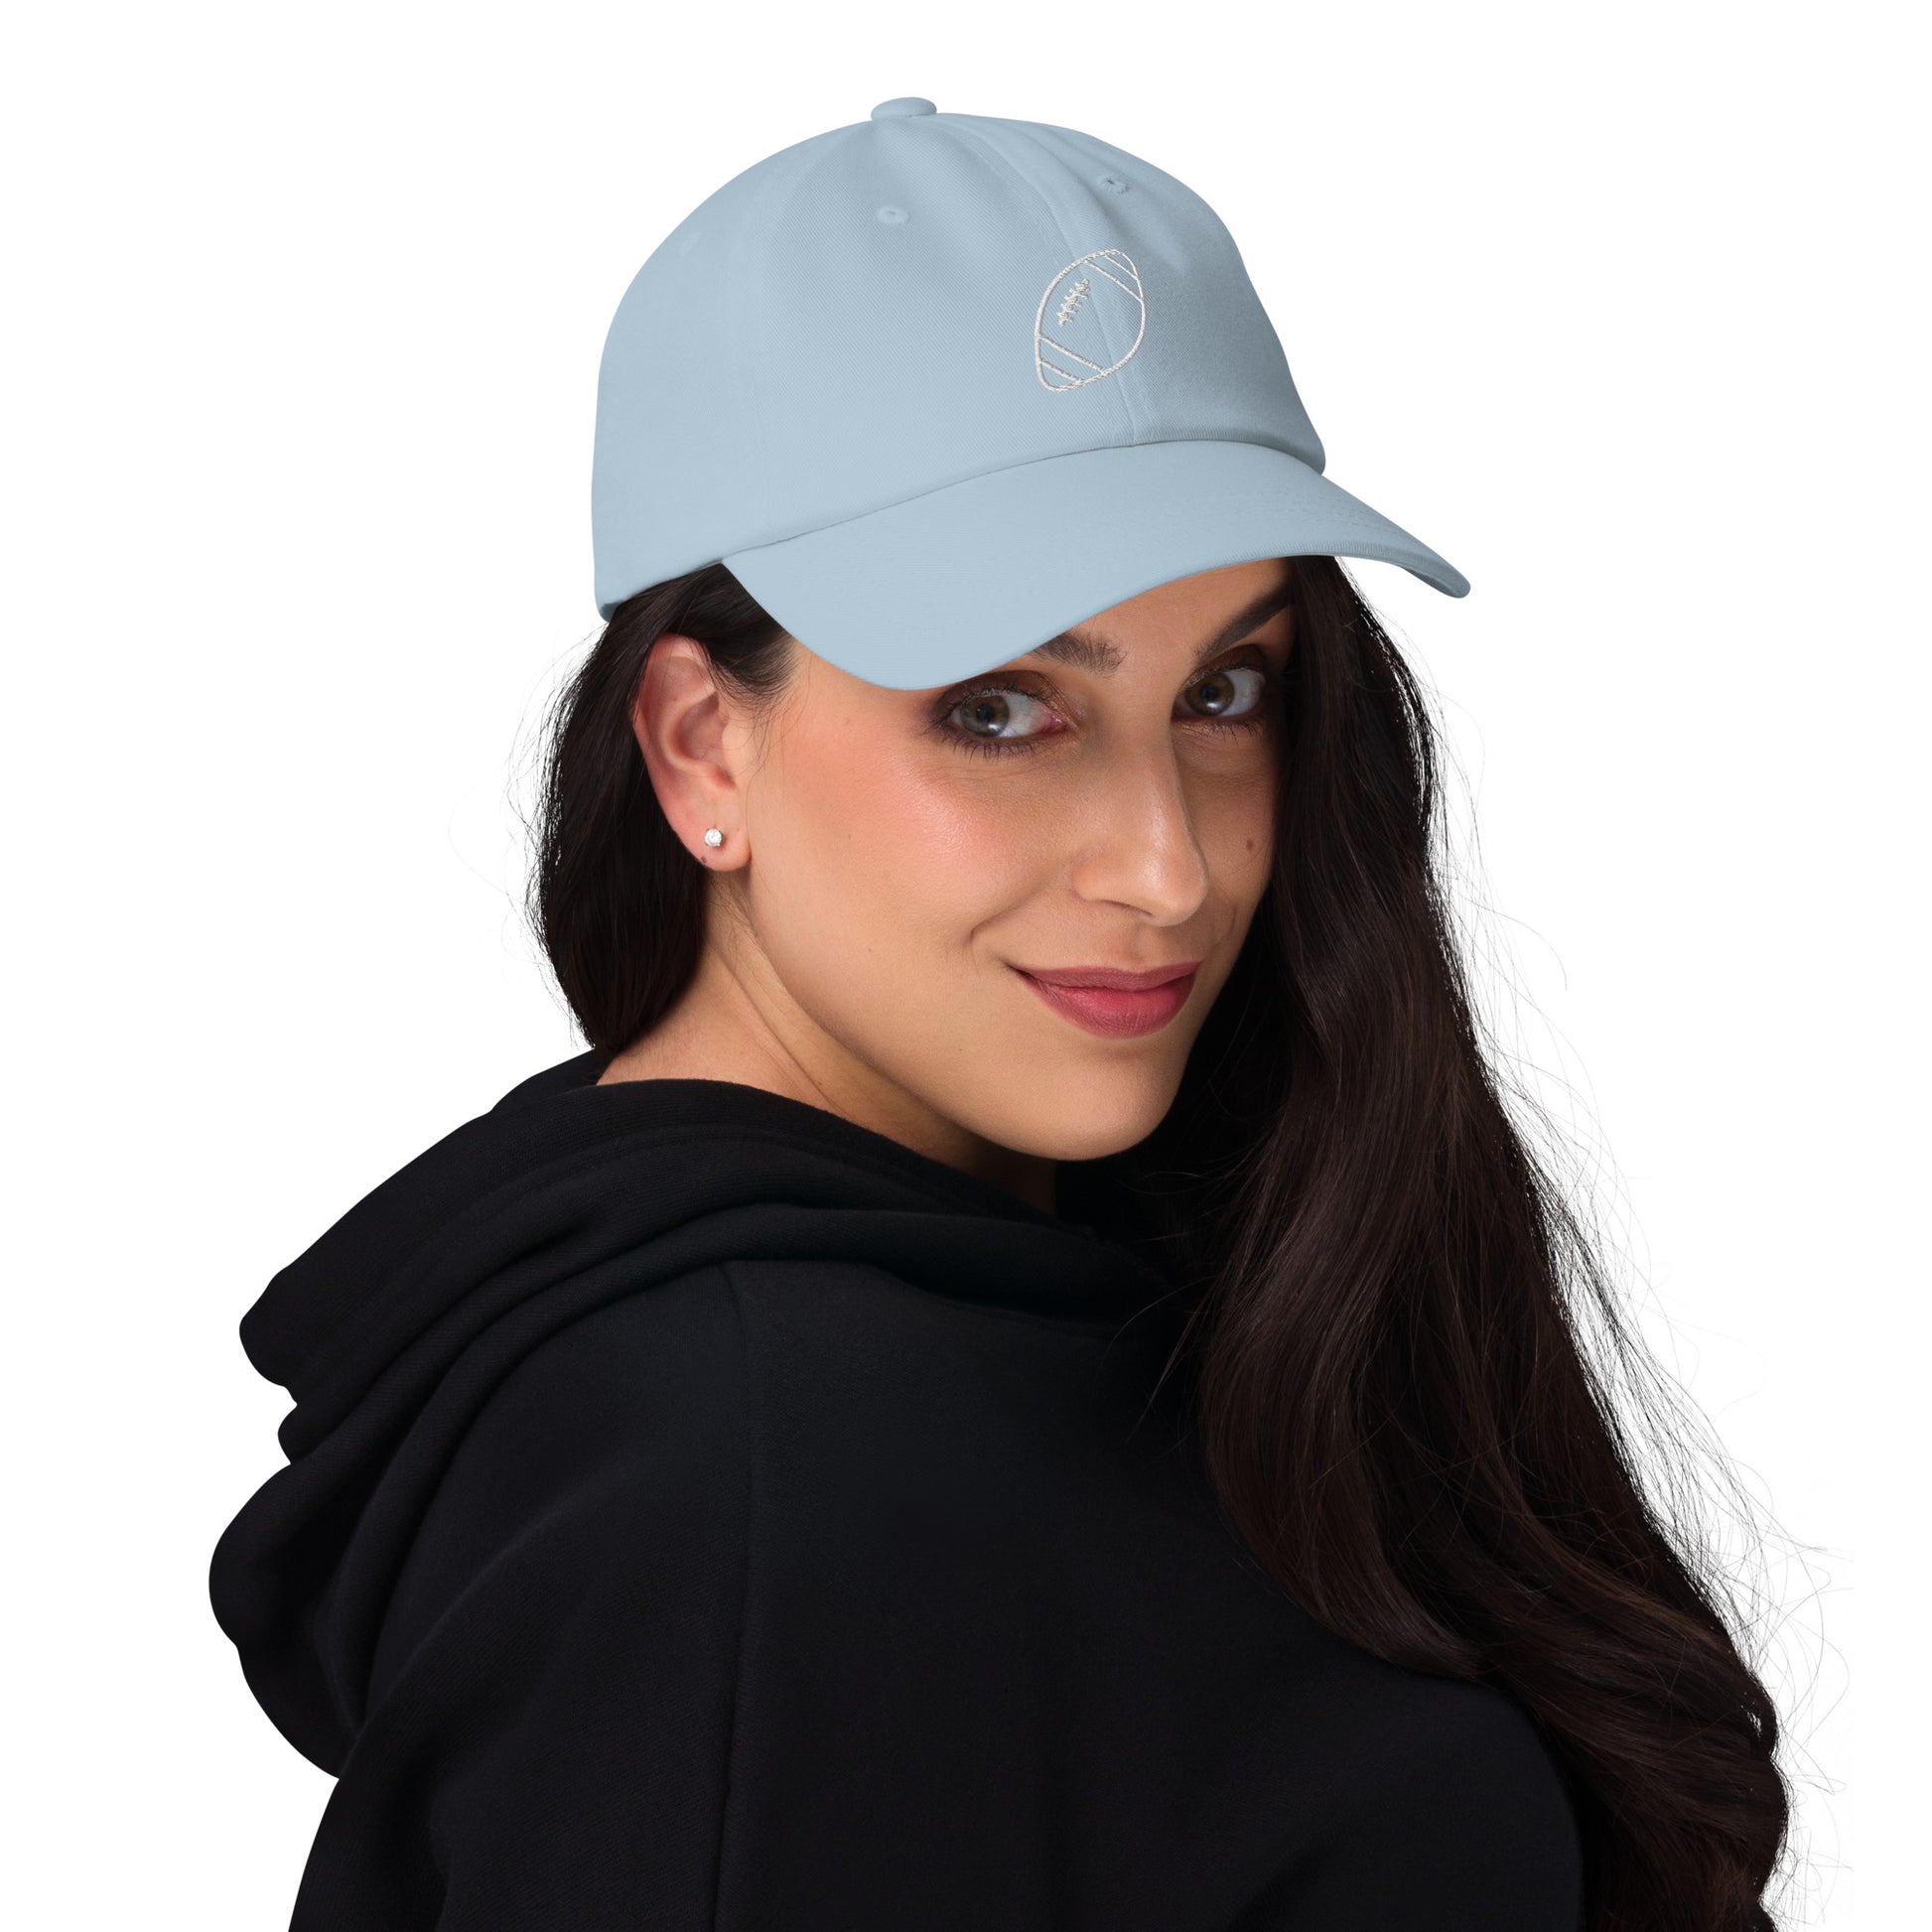 women with light blue baseball cap with football